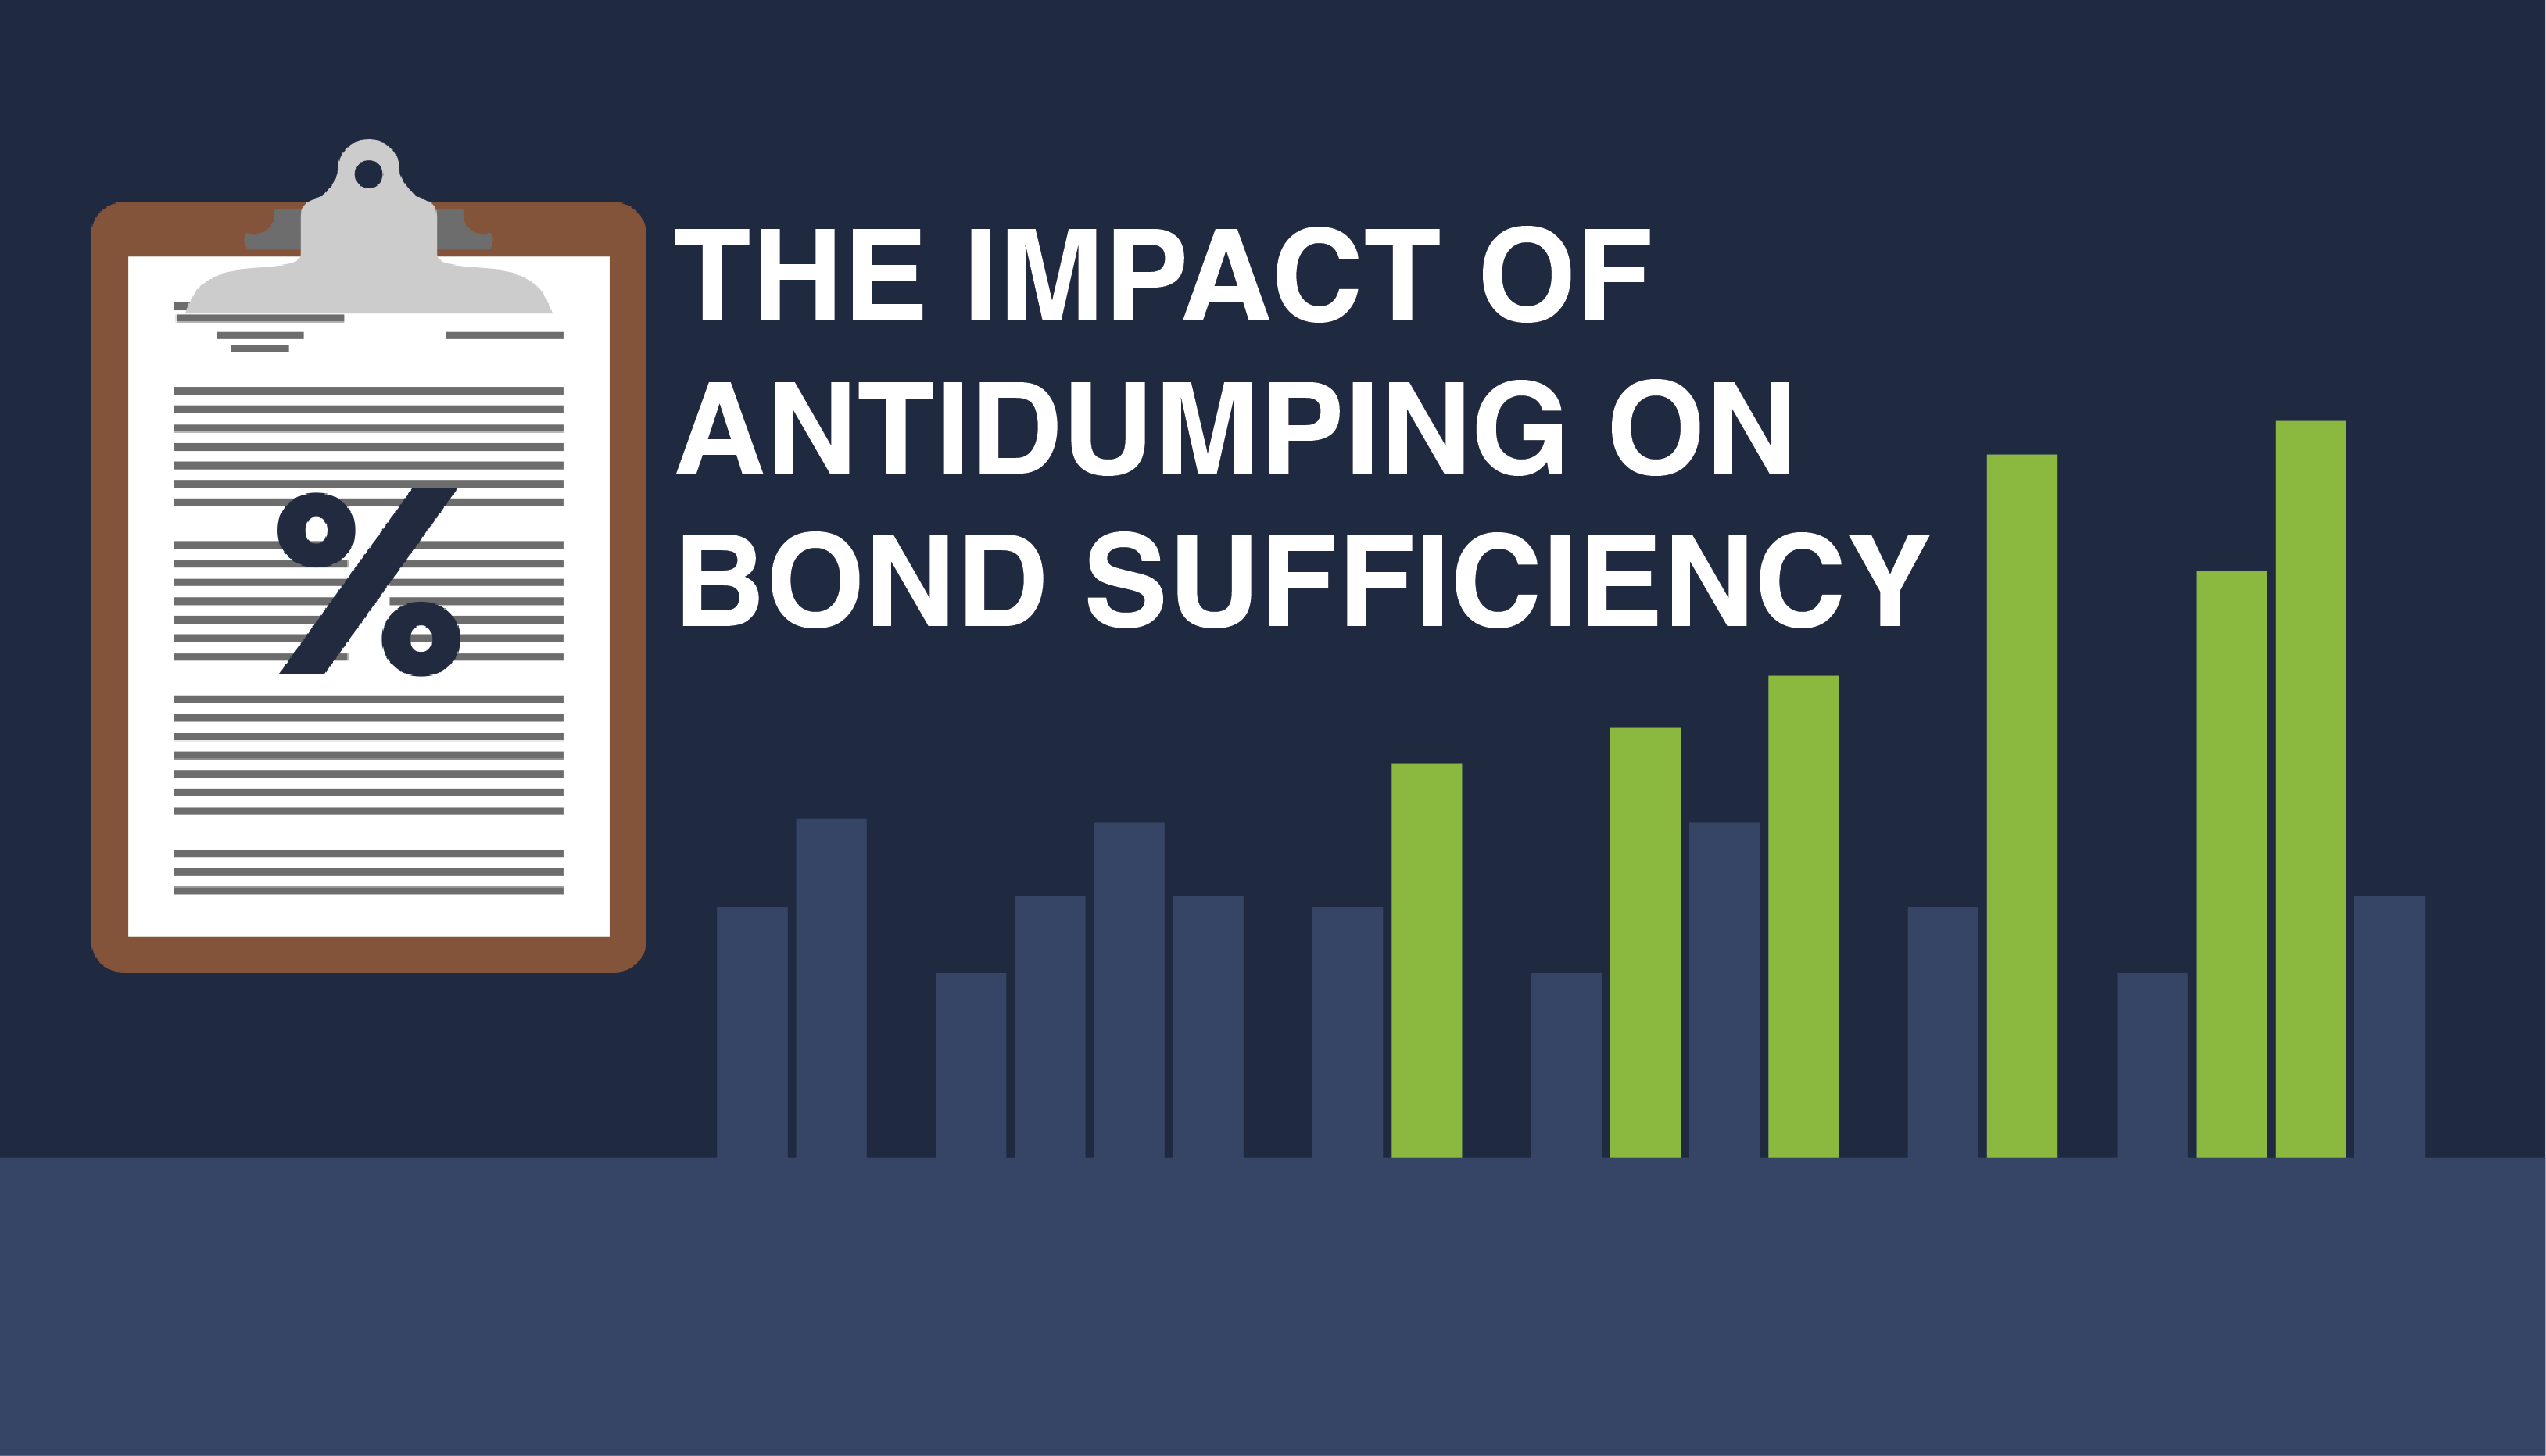 TRG explains antidumping's impact on Customs Bond Sufficiency.